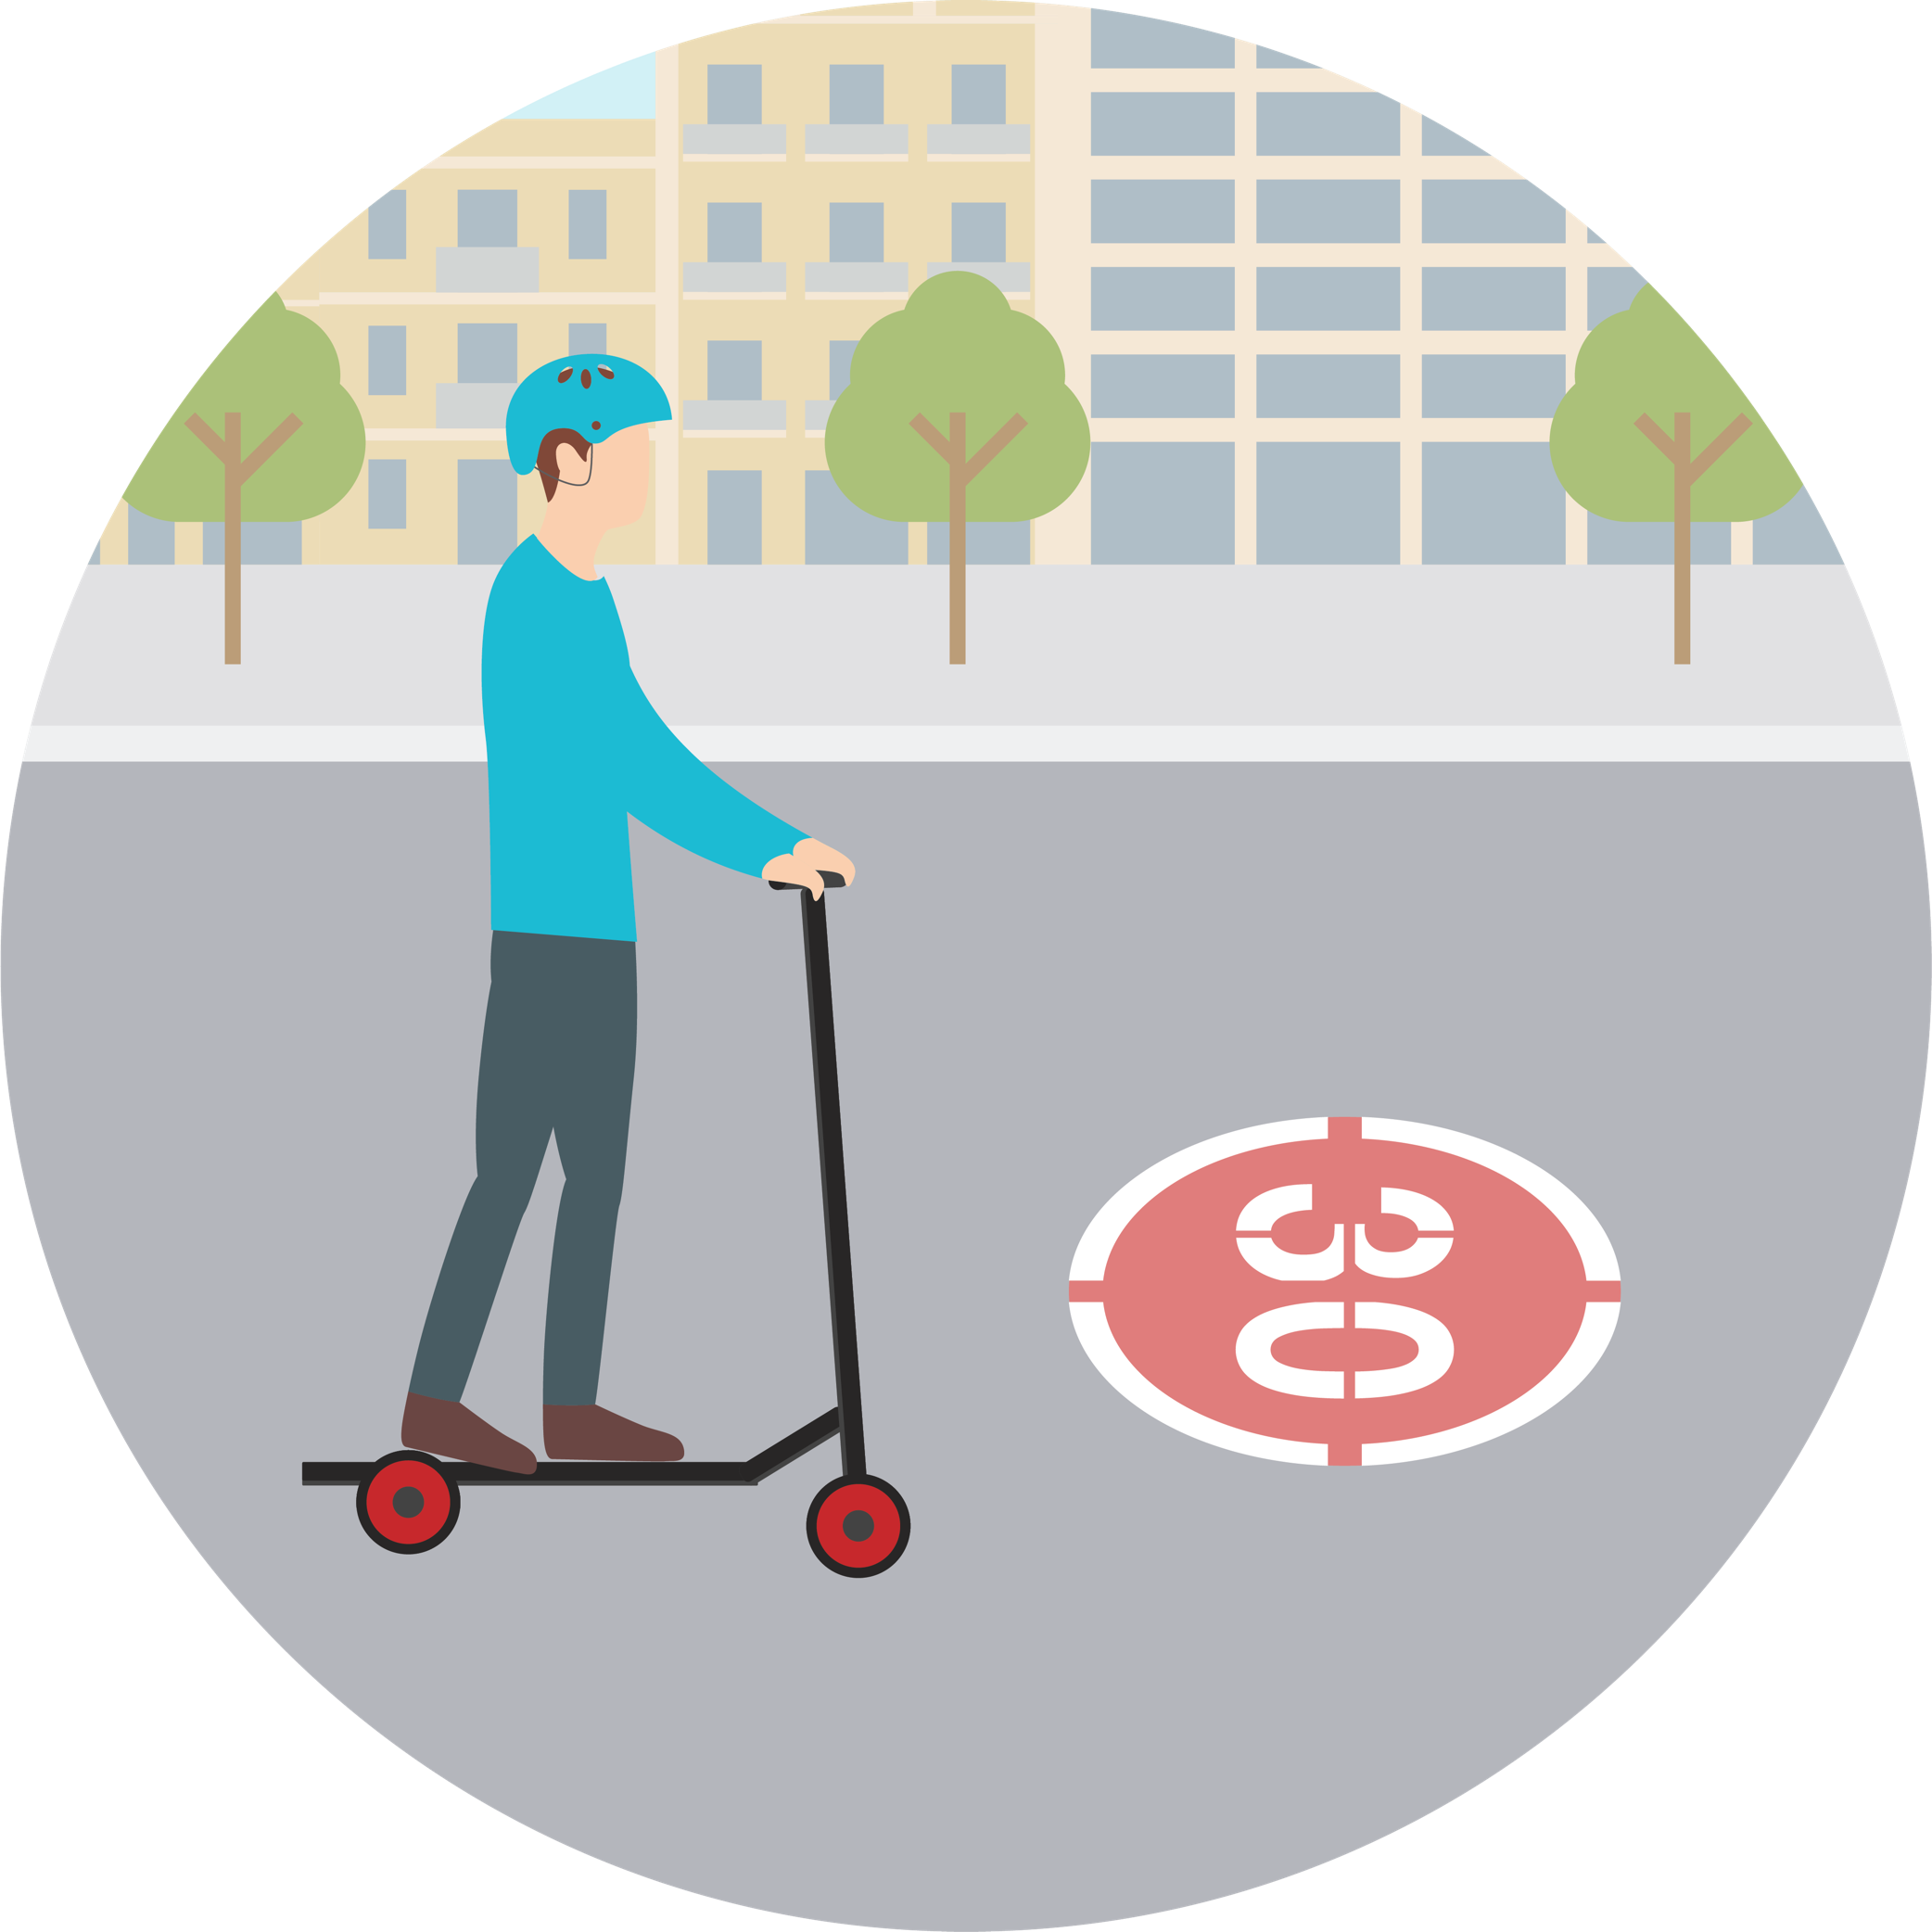 Can I ride electric scooters on the 30 km/h lane in Barcelona?